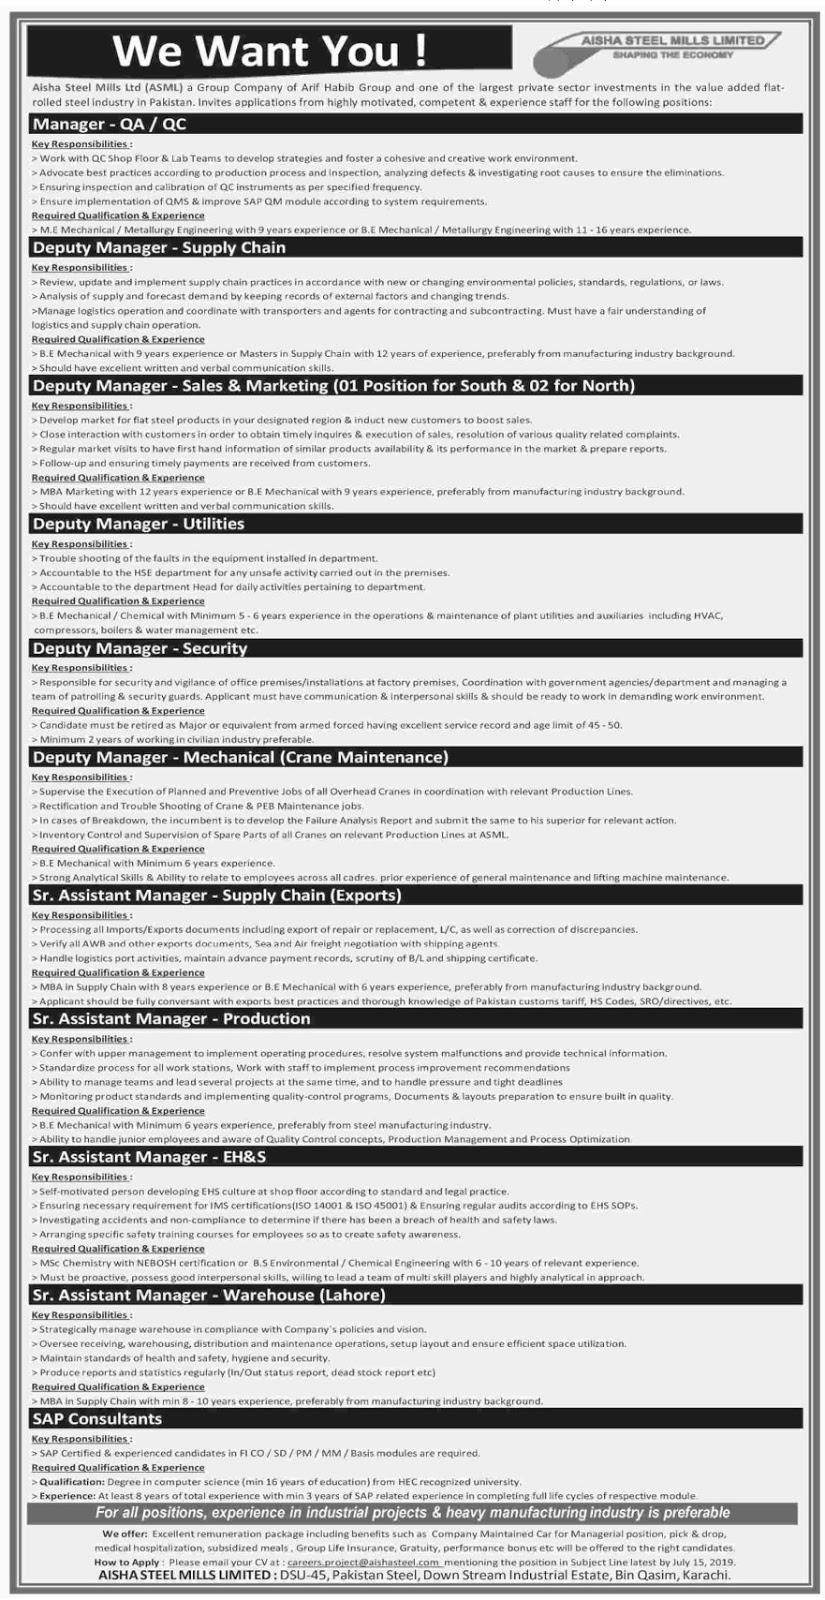 Latest Jobs Aisha Steel Mills Ltd (ASML) June 2019 for Deputy Mangers, Assistant Managers, Consultants & Manager